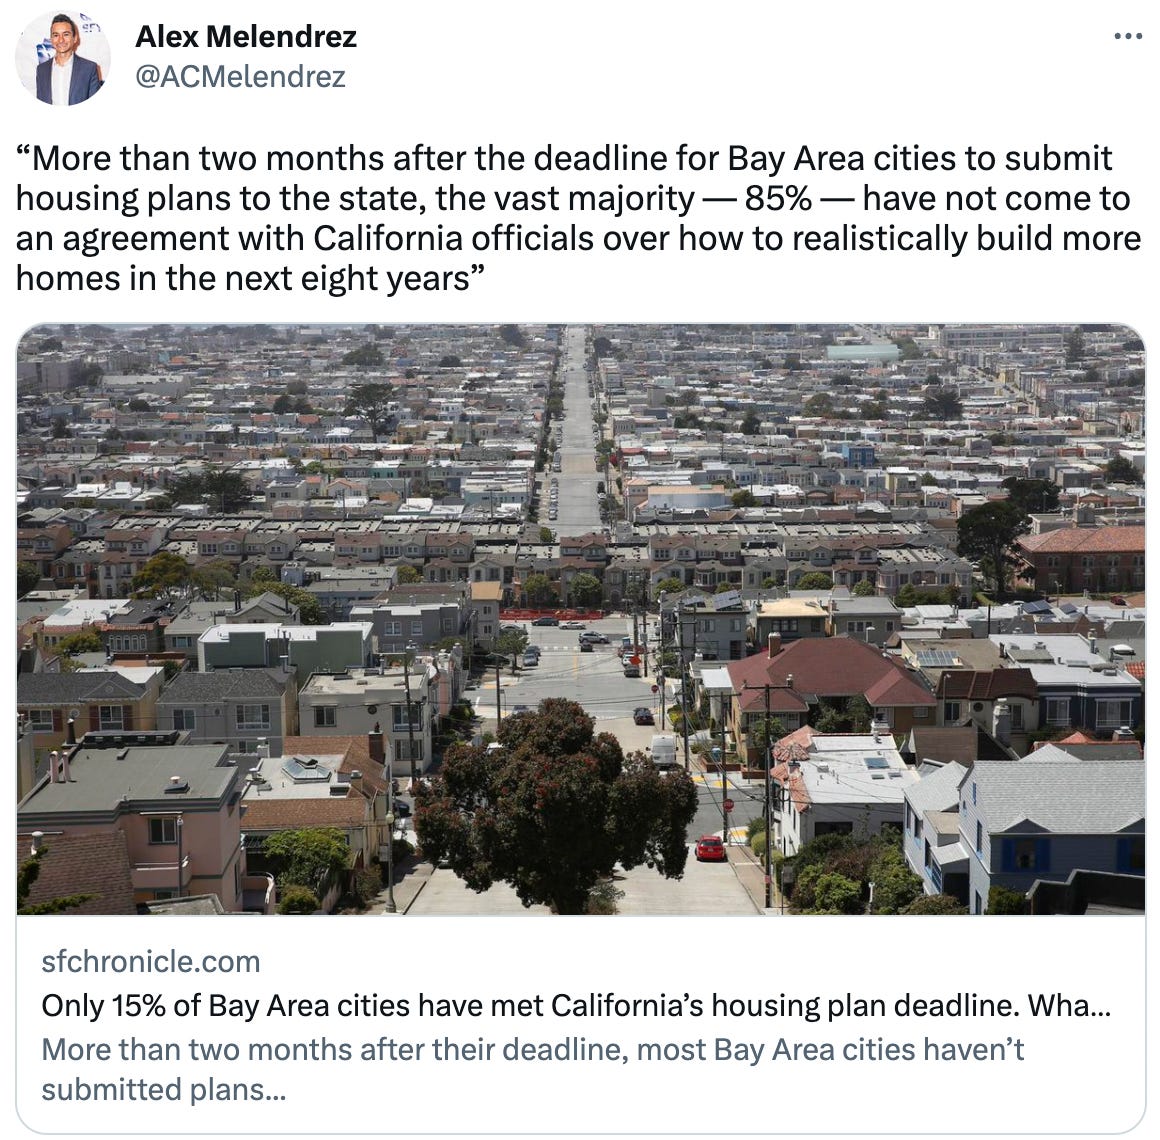  Alex Melendrez @ACMelendrez “More than two months after the deadline for Bay Area cities to submit housing plans to the state, the vast majority — 85% — have not come to an agreement with California officials over how to realistically build more homes in the next eight years”